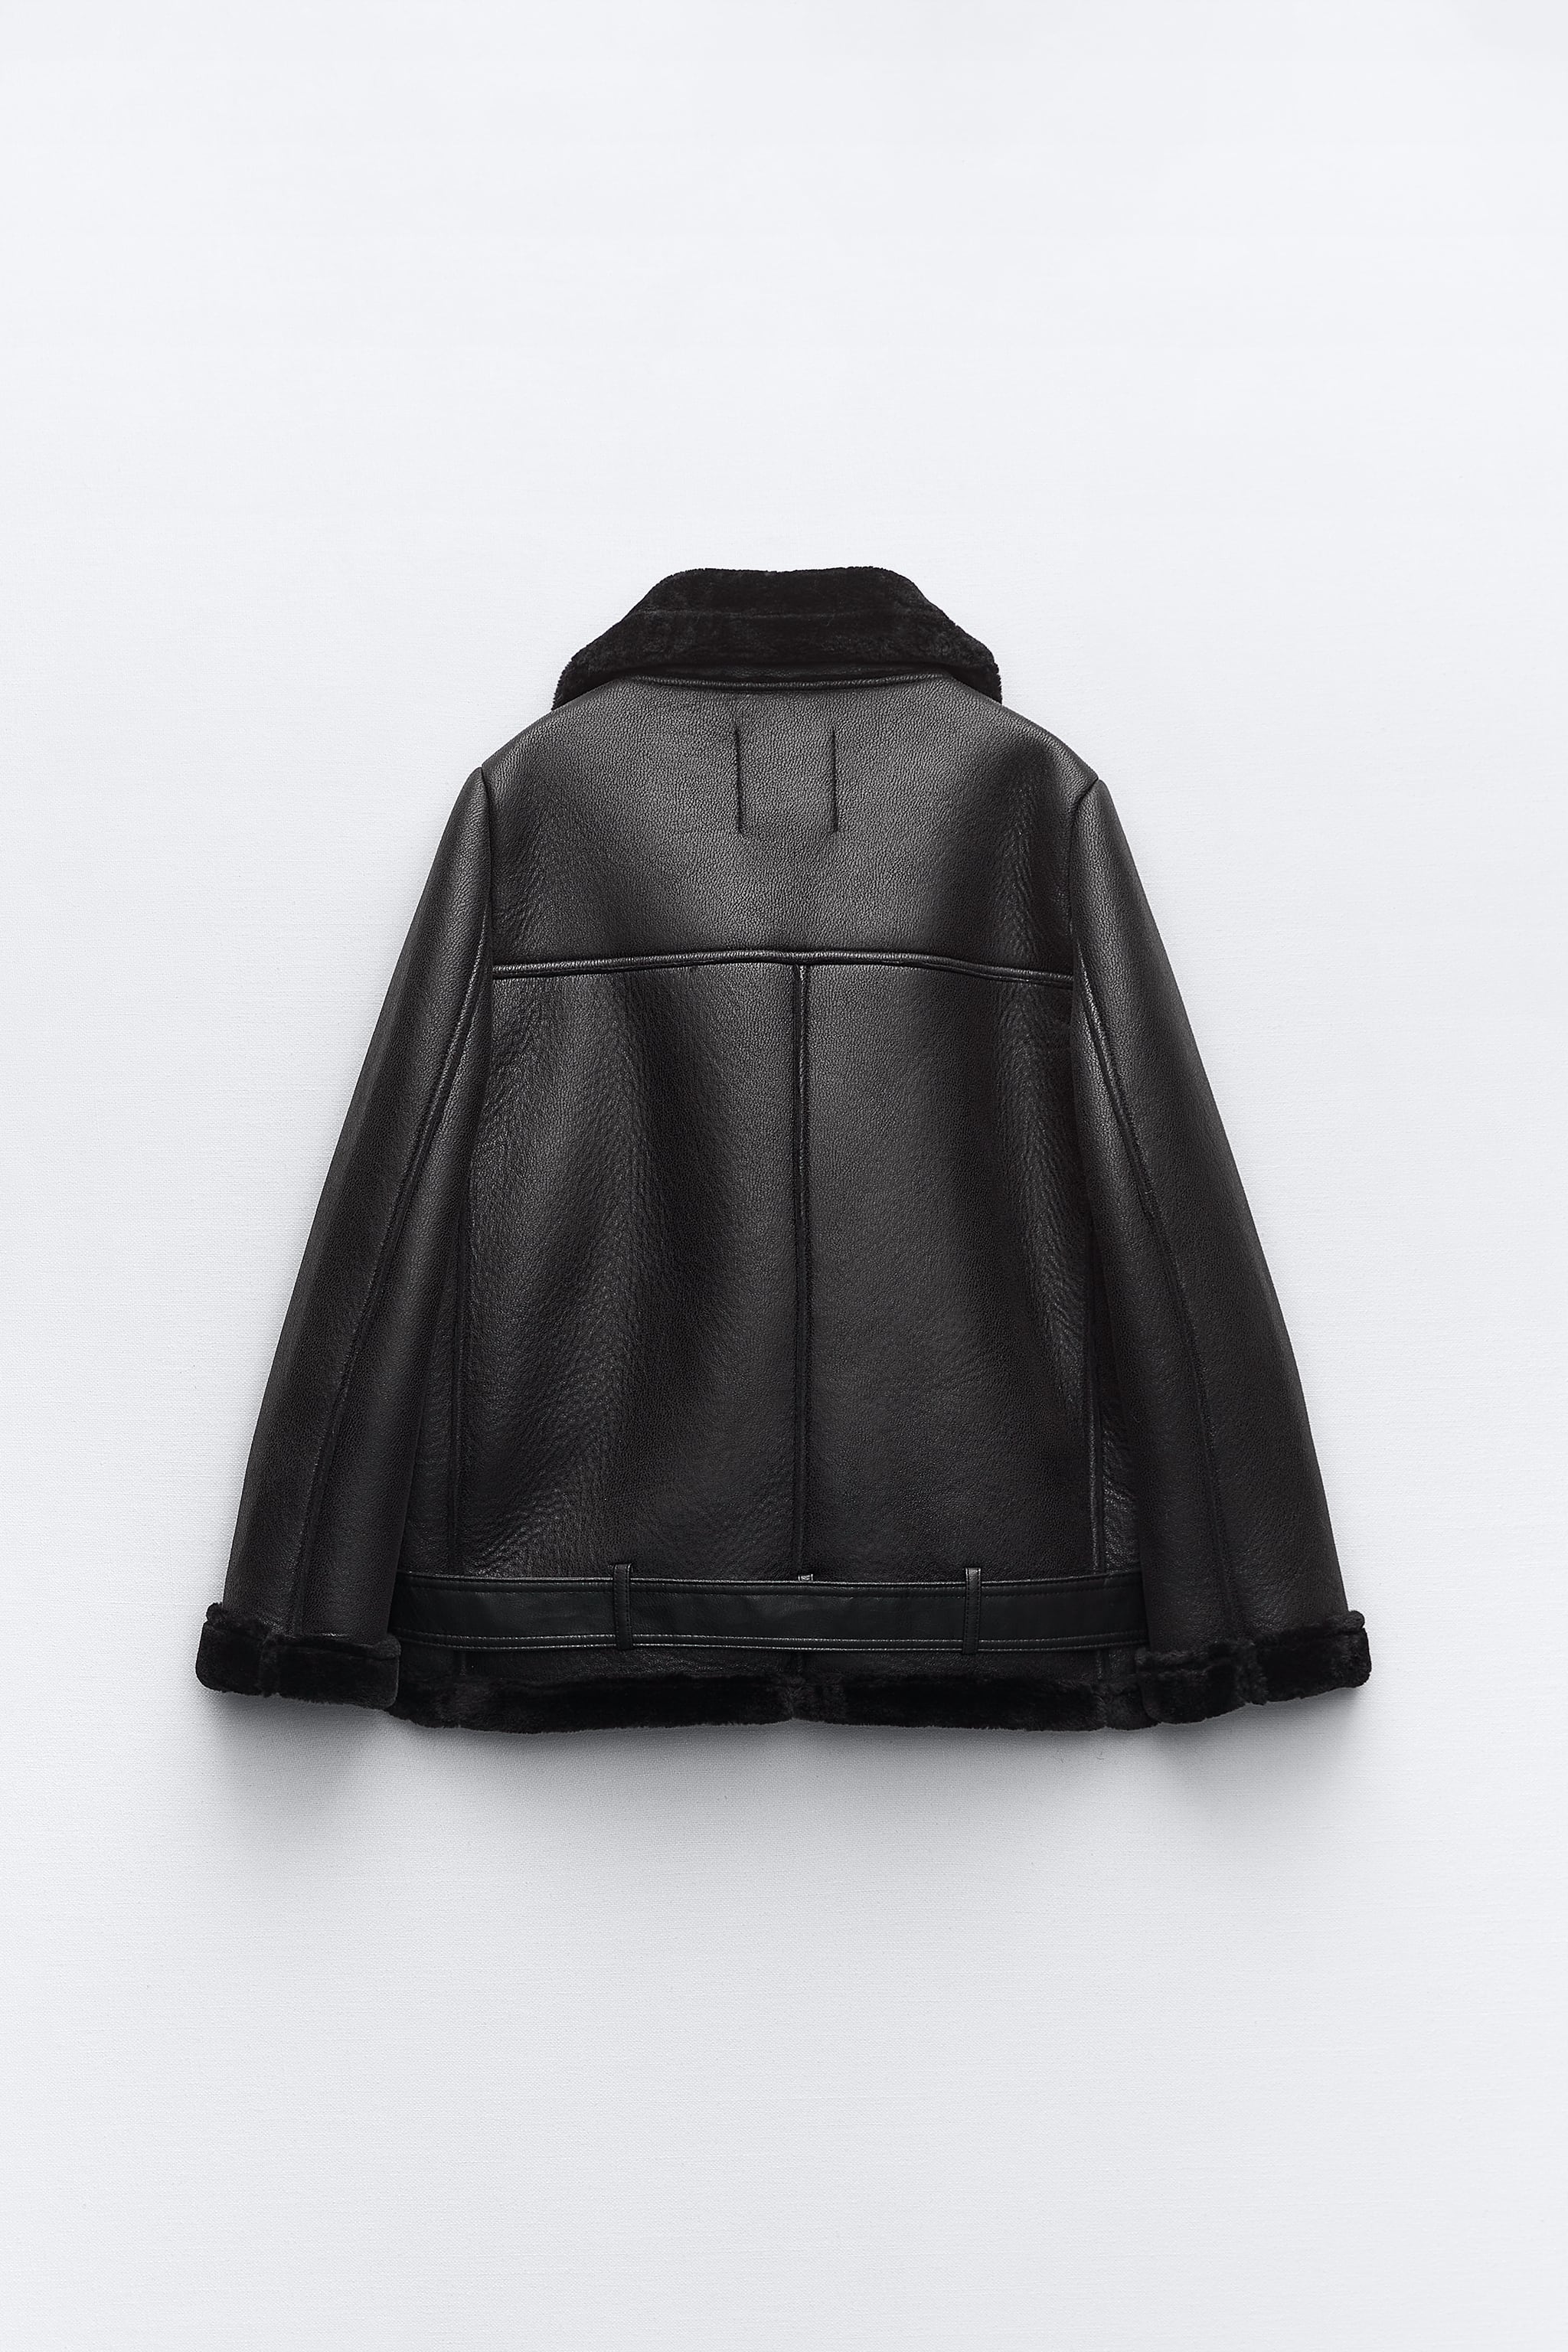 ZW COLLECTION DOUBLE-FACED BIKER JACKET